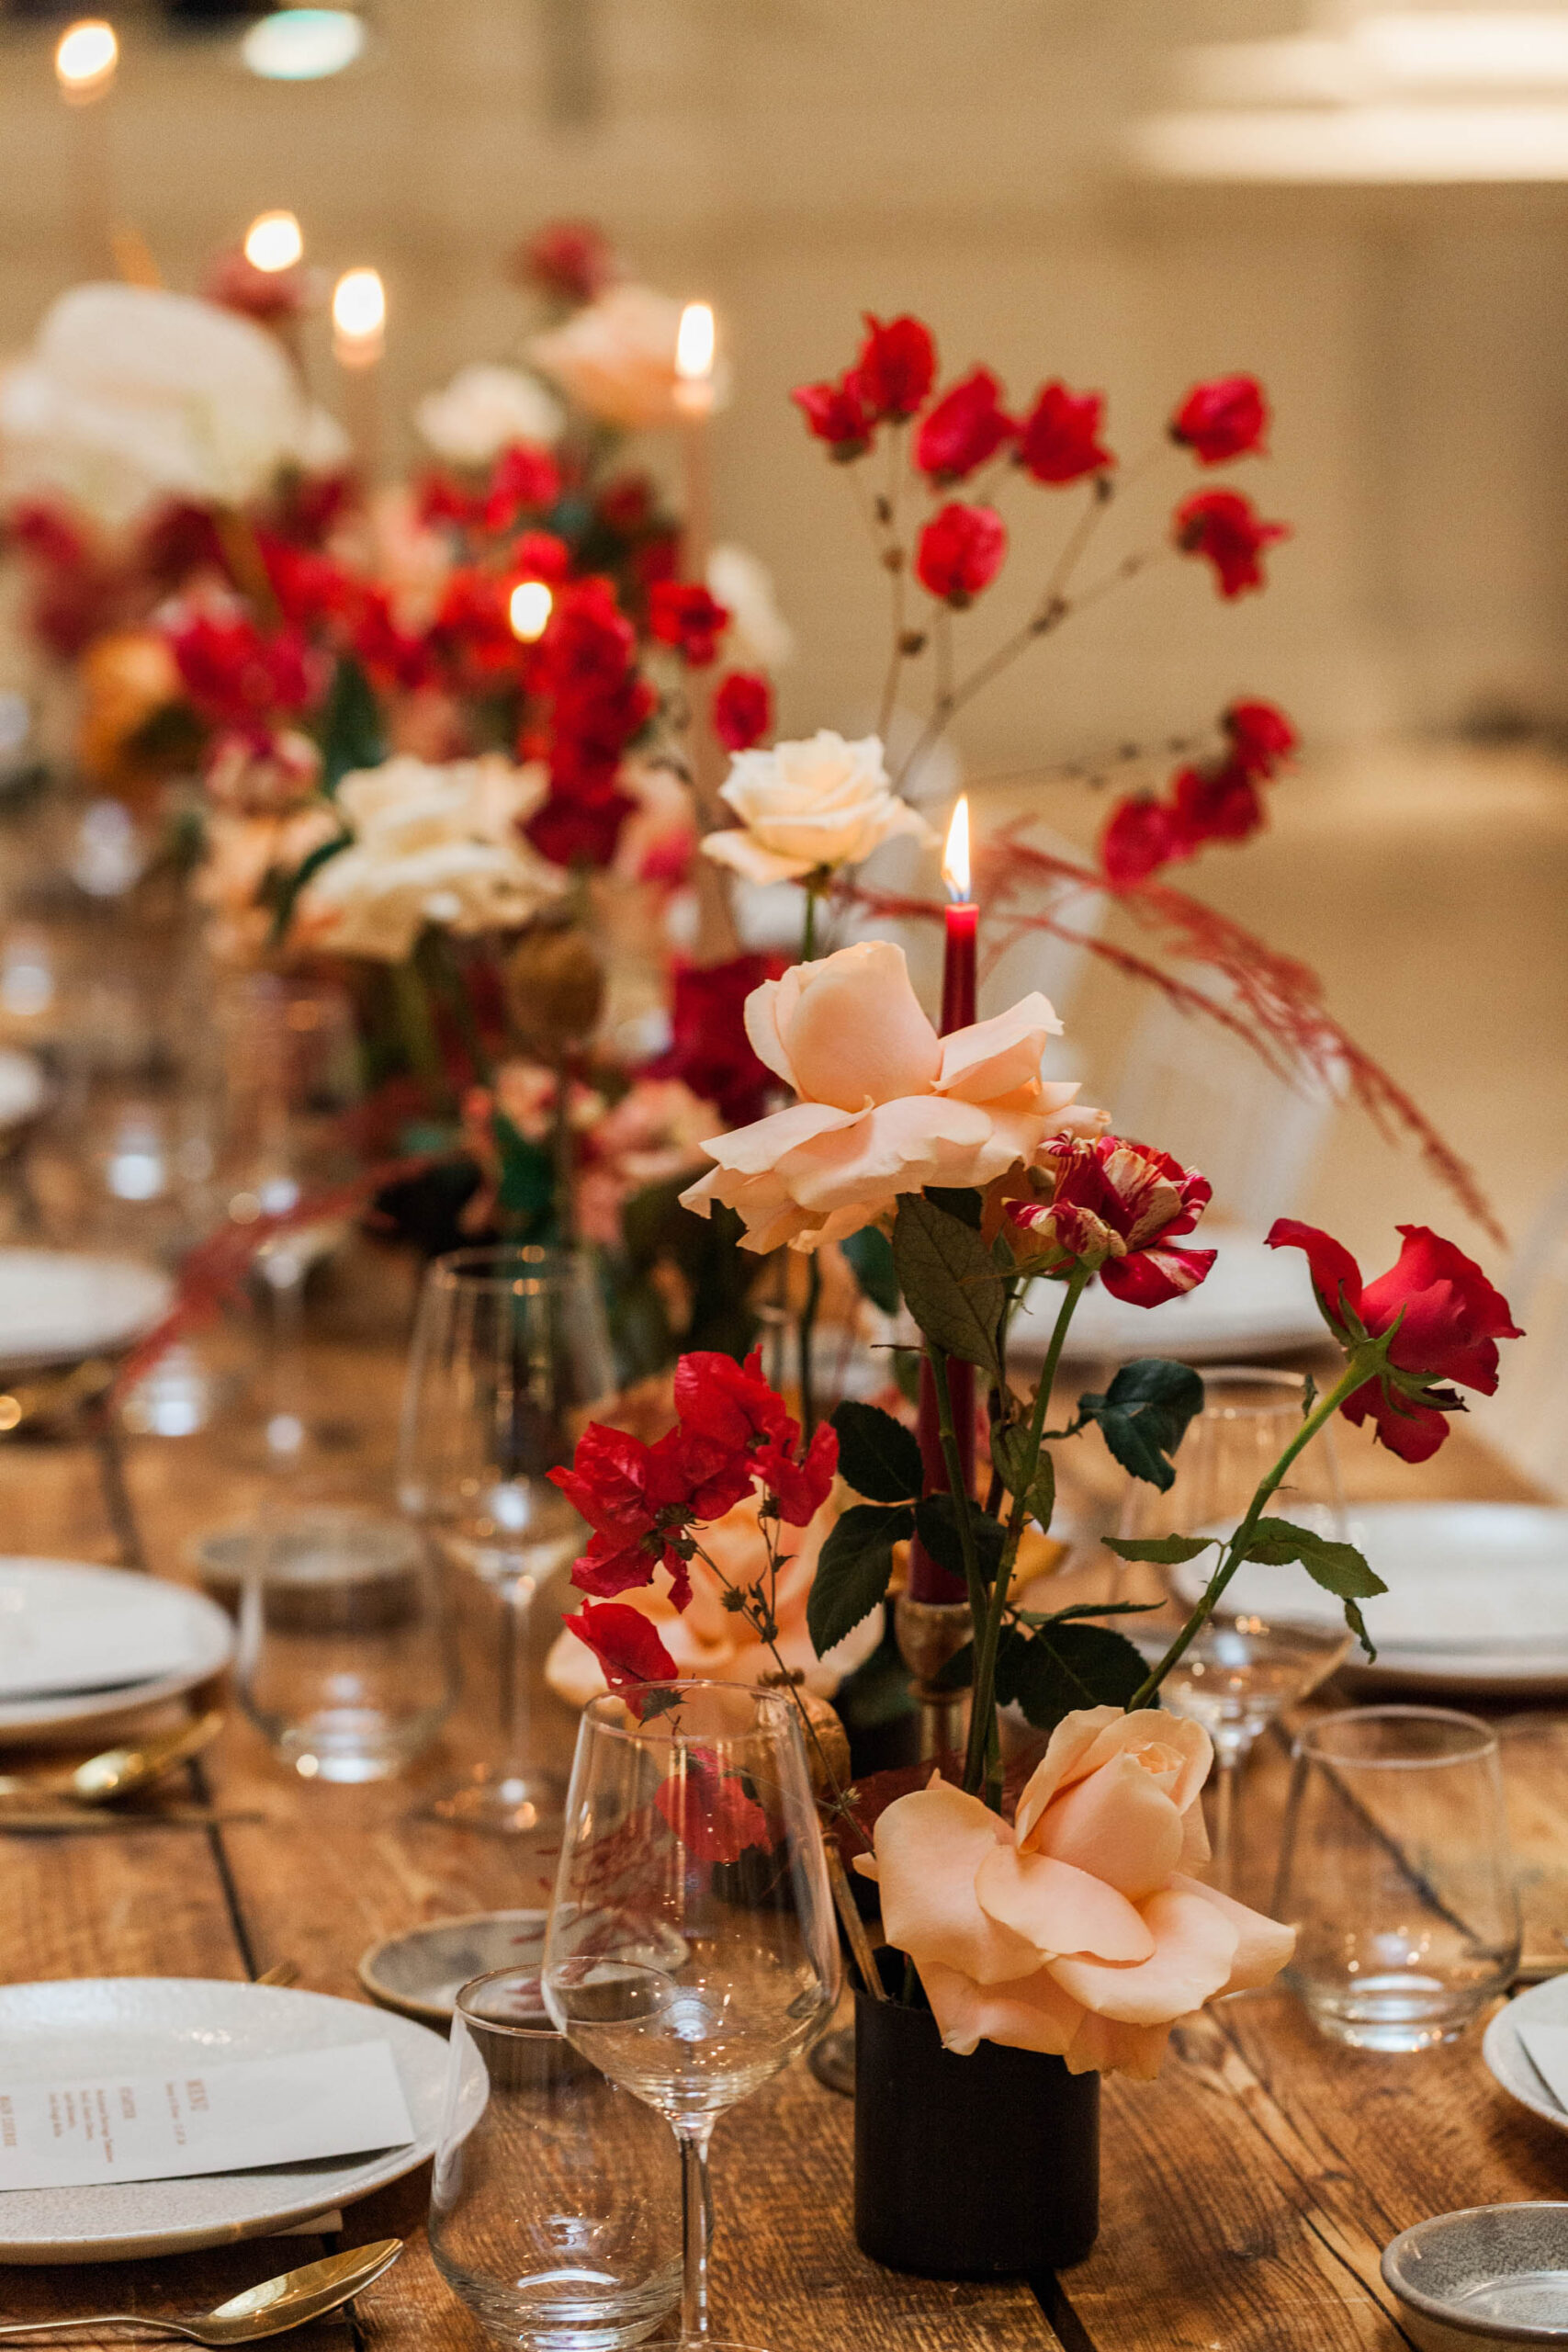 A wedding table laid with white crockery and delicate glassware, with candles and flowers in reds, corals and cream